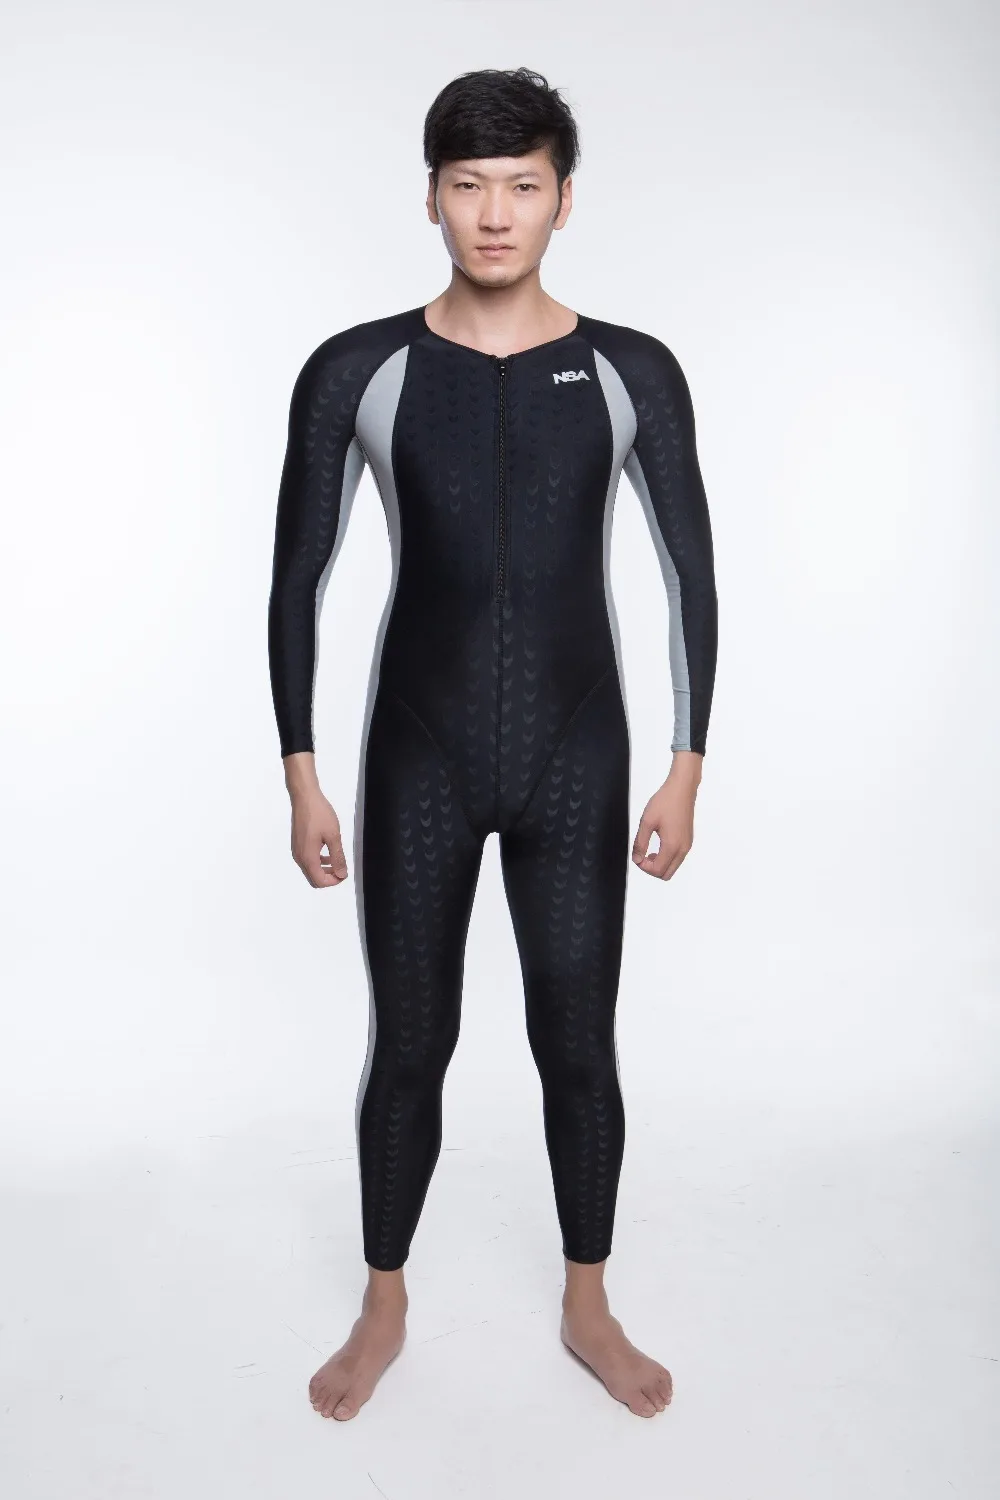 NSA competition full body triathlon wetsuit black one piece racing